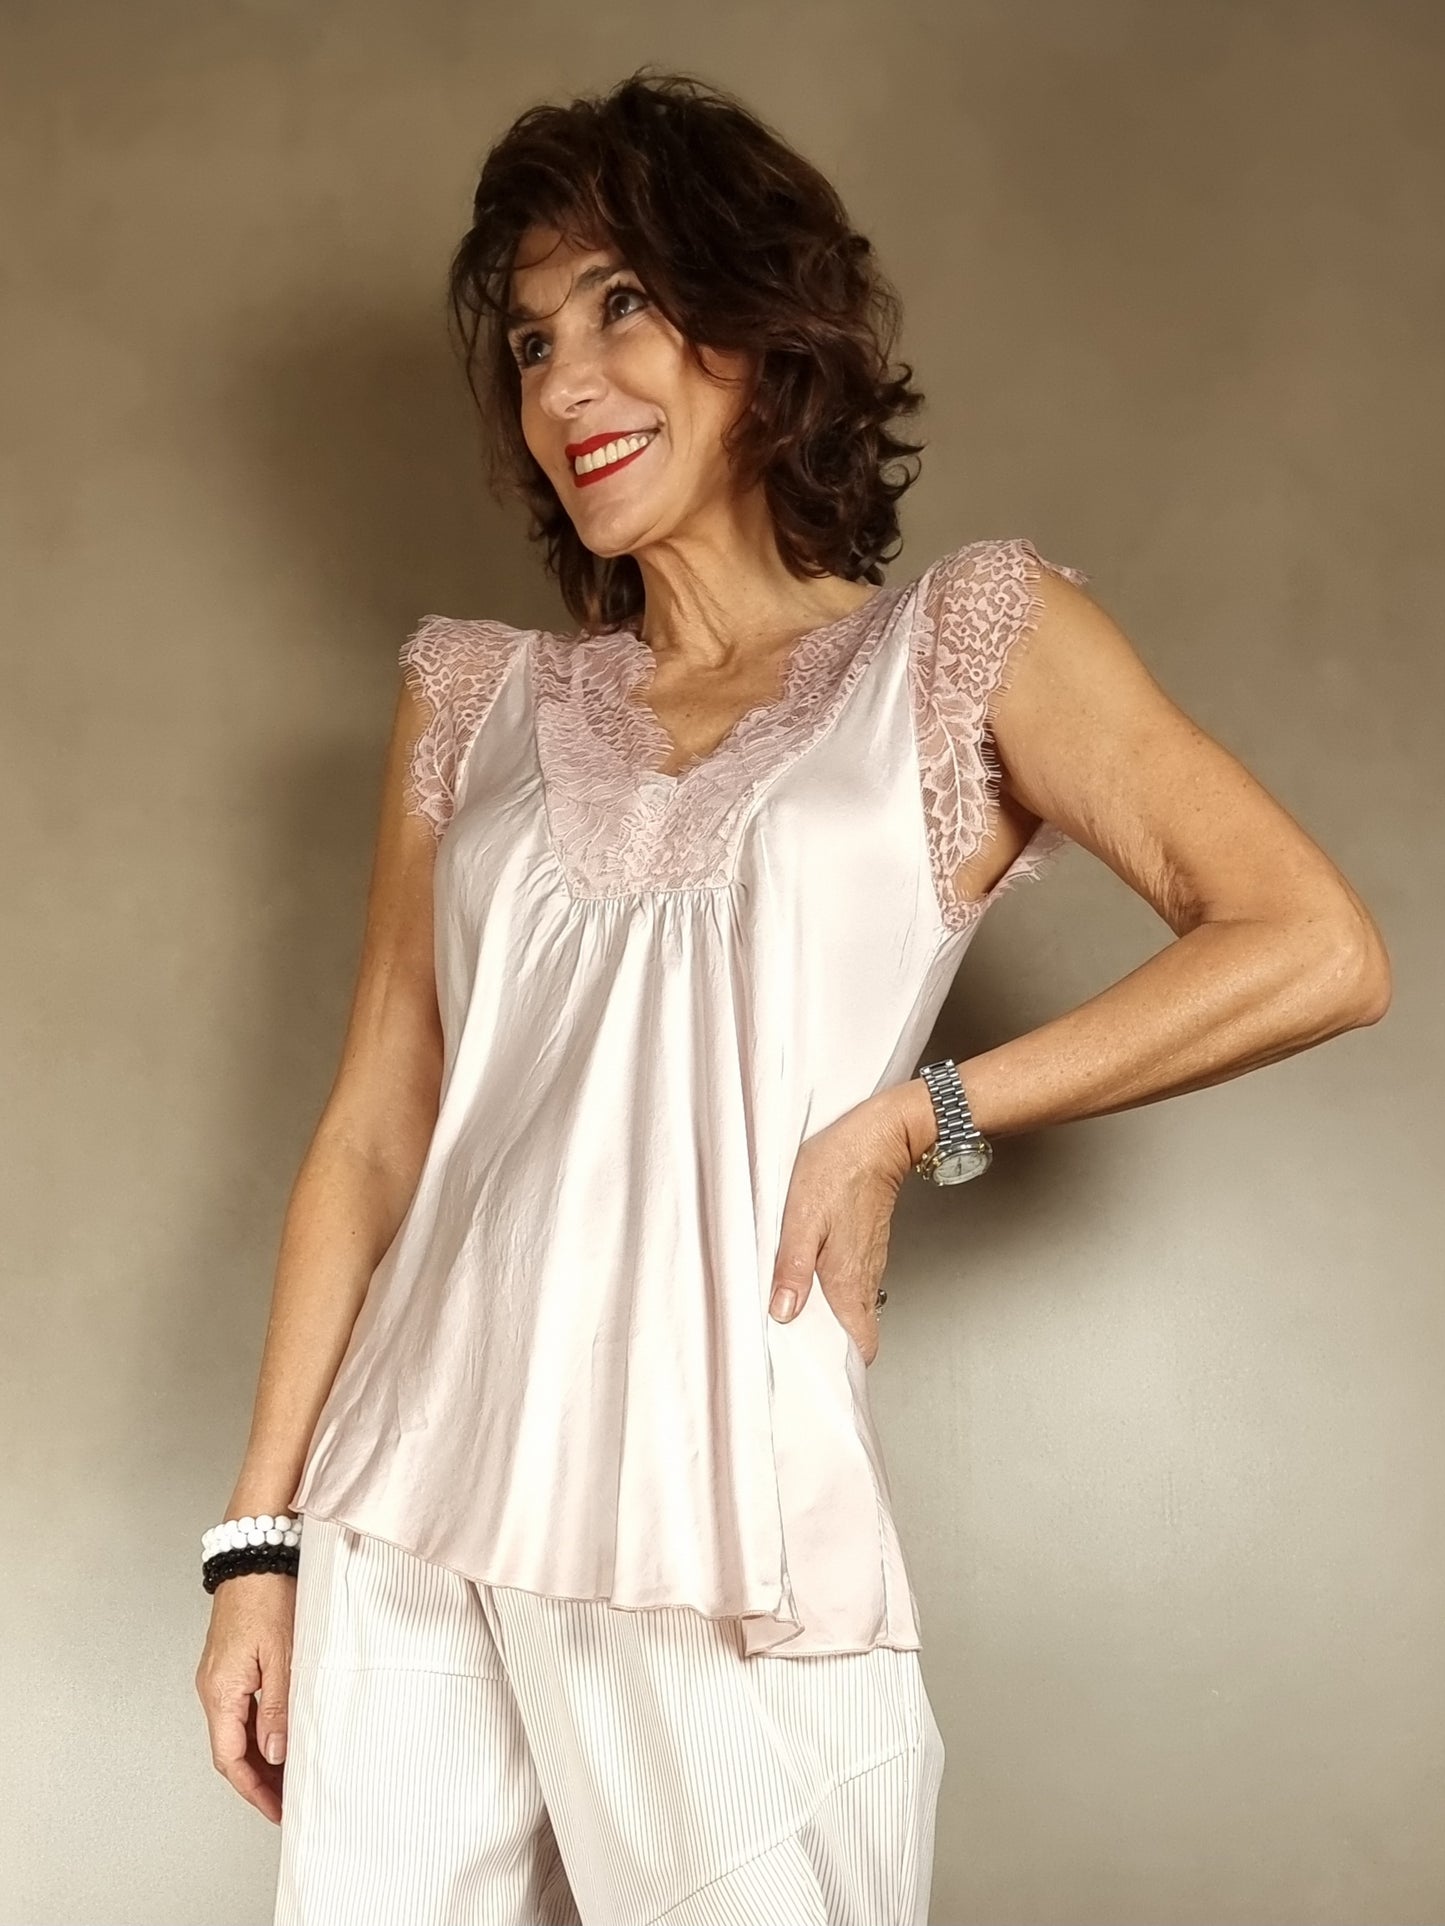 v-neck tank top with man lace 100vi